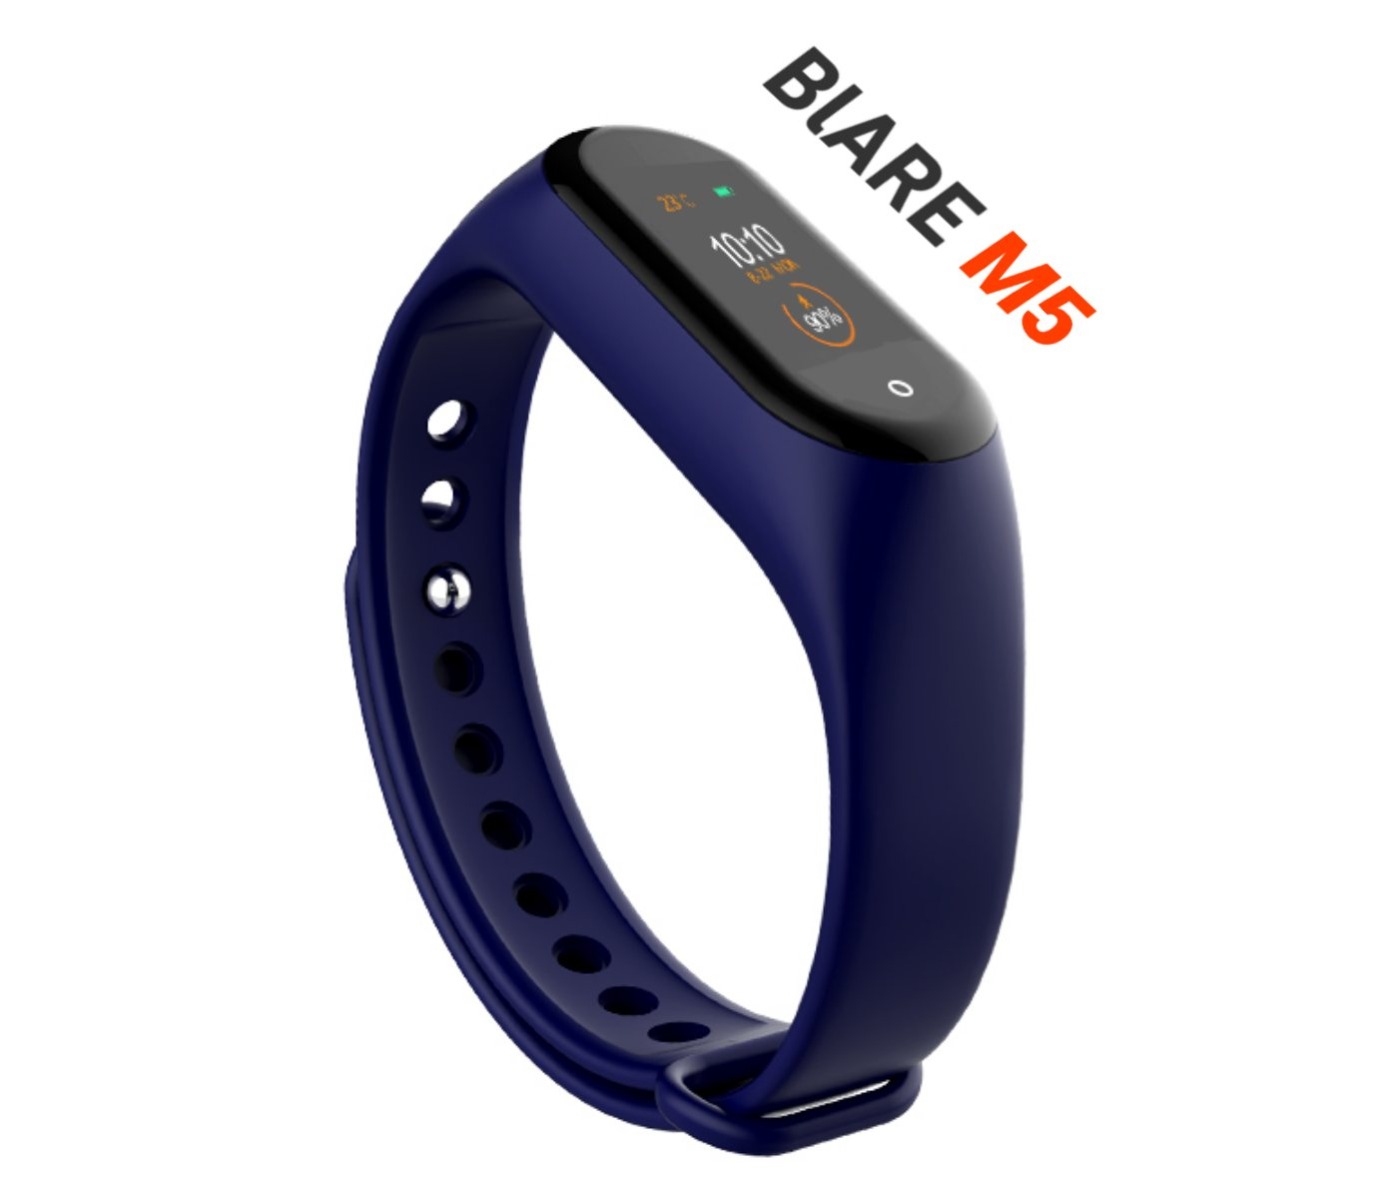 Buy big discount on Blare M5 fitness band